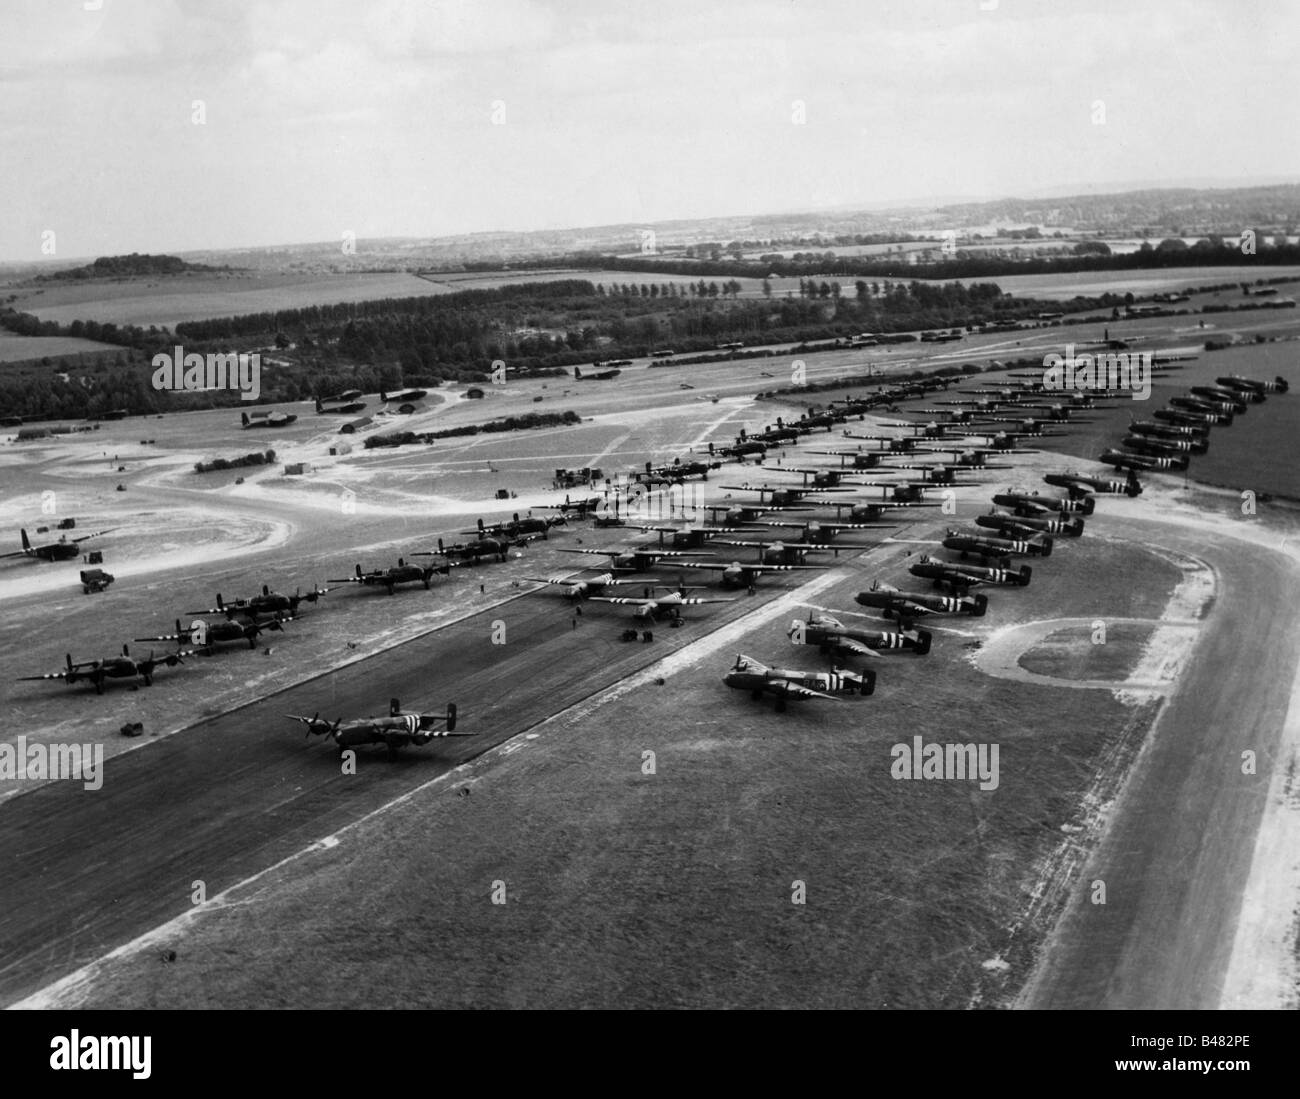 events, Second World War / WWII, France, Invasion 1944, British airfield with bombers and military gliders, squadron taking off, 6.6.1944, Stock Photo